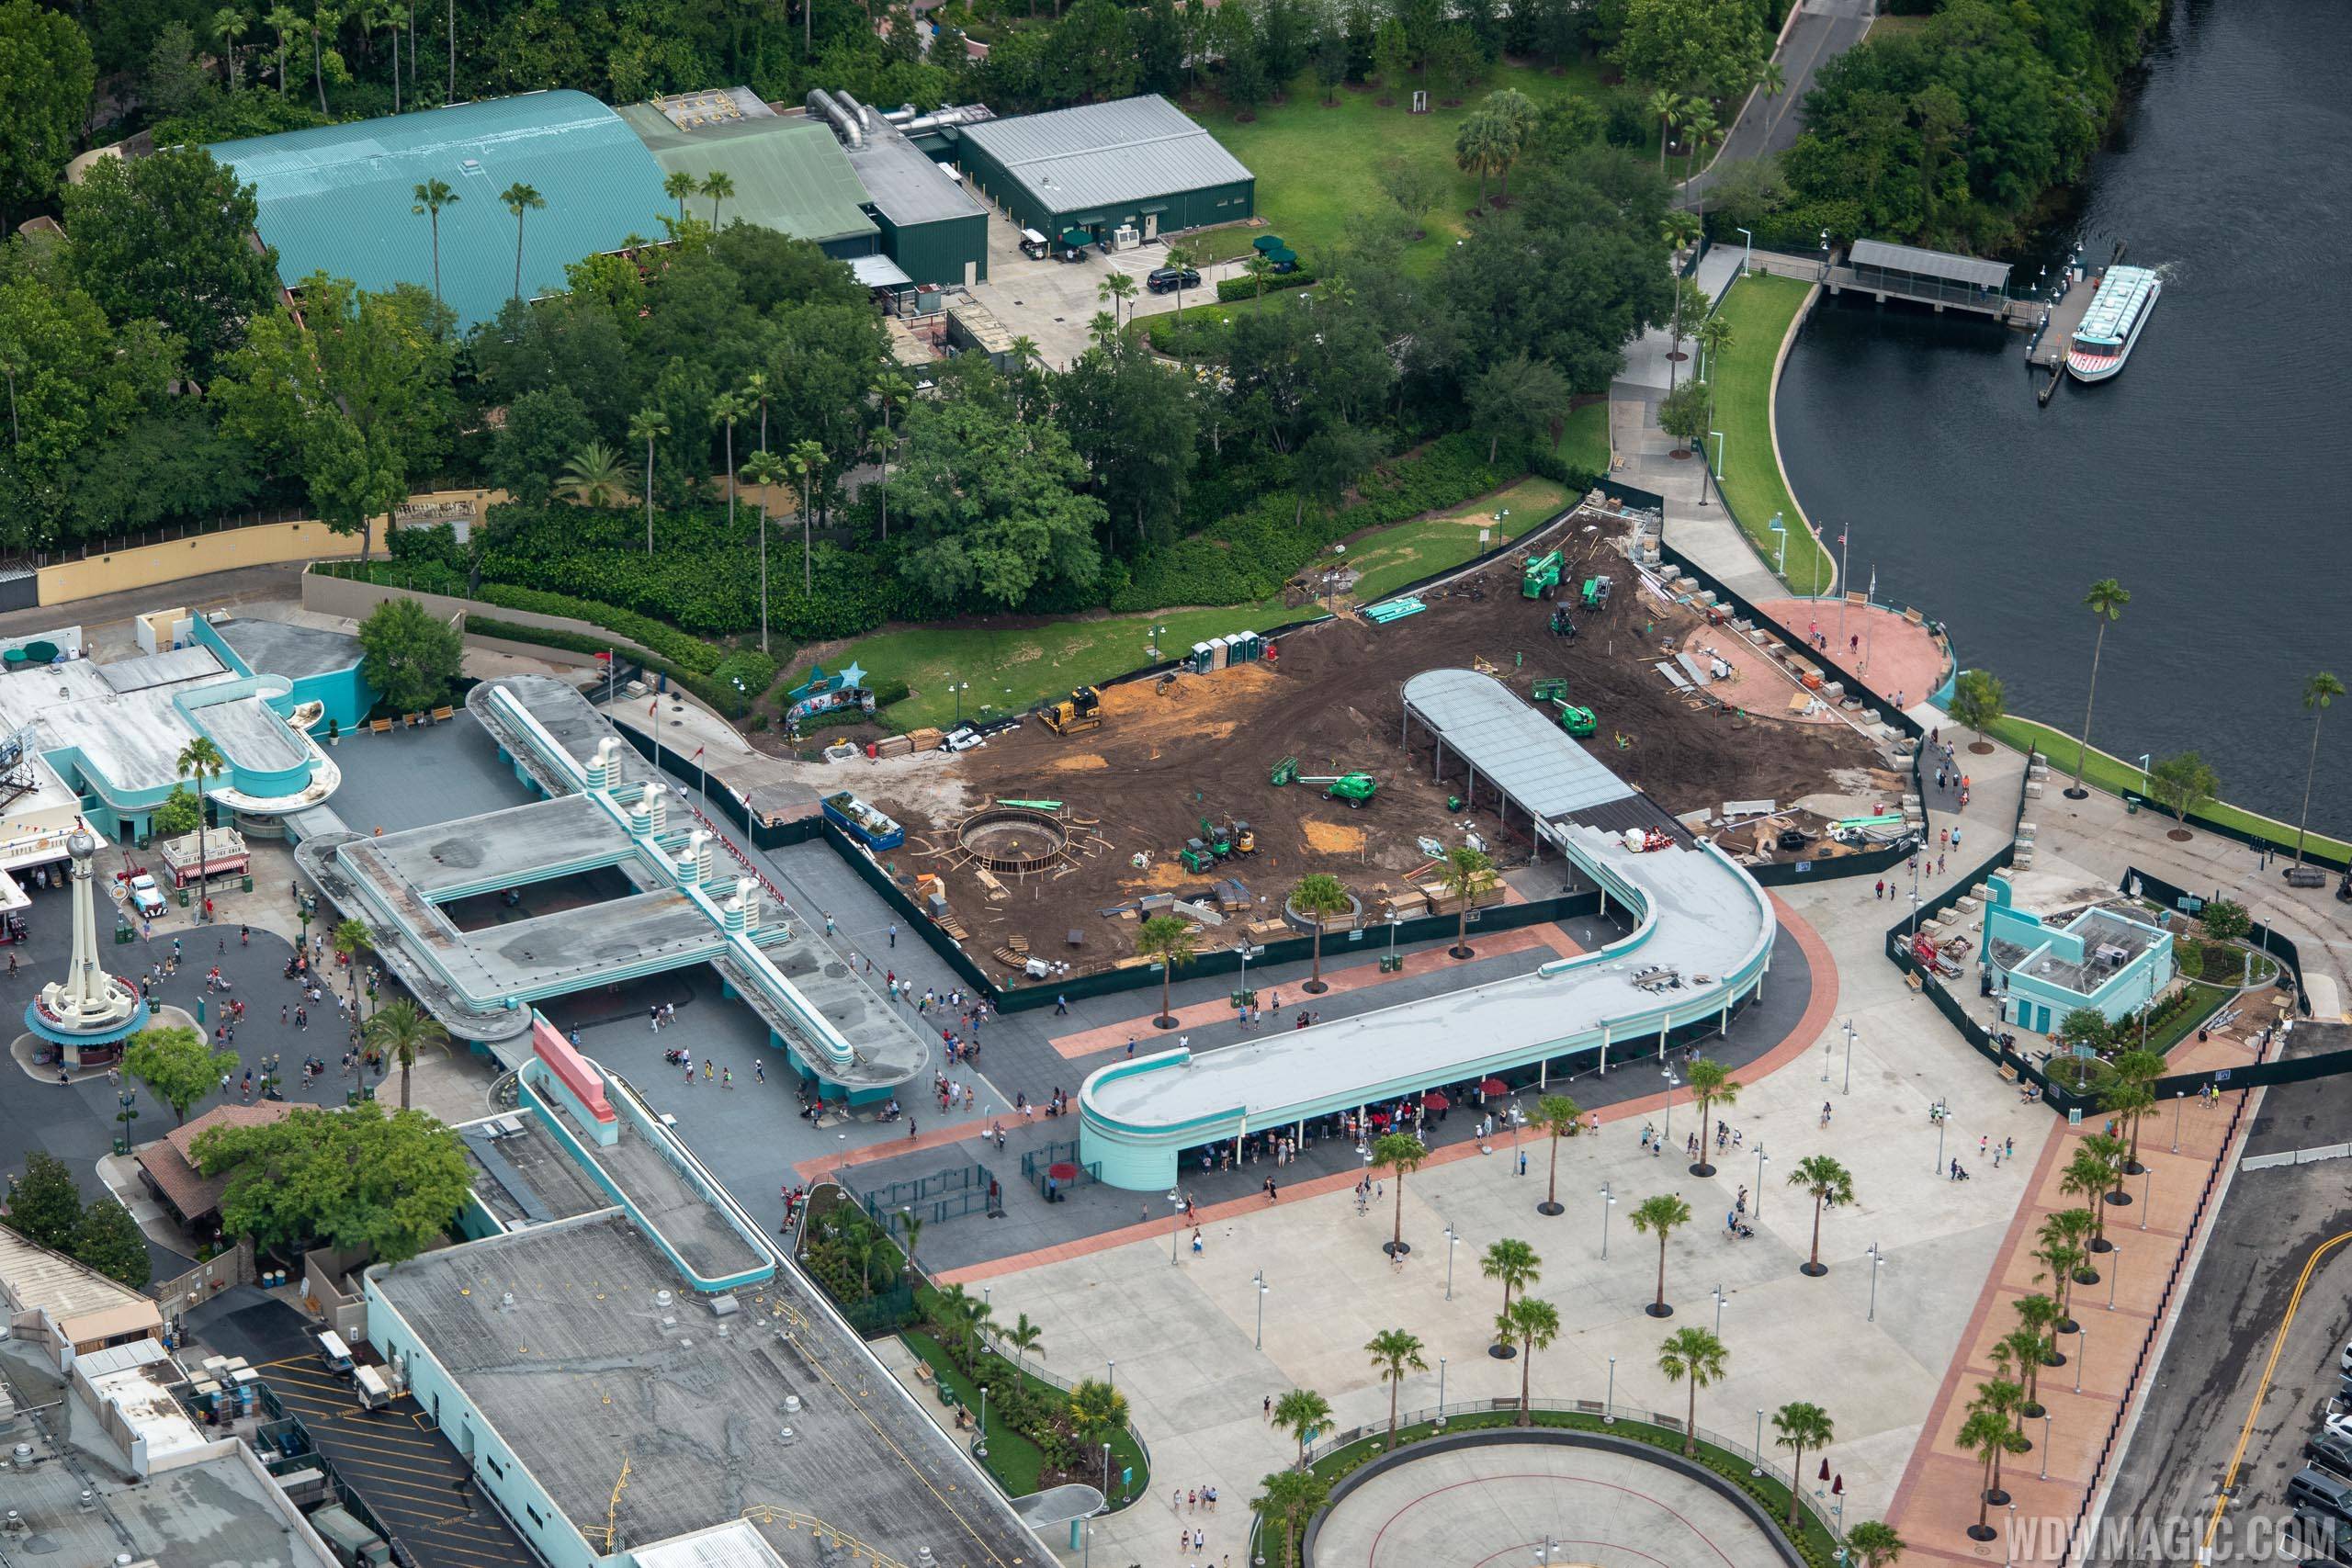 PHOTOS - Aerial view of the new Disney's Hollywood Studios entrance area under construction